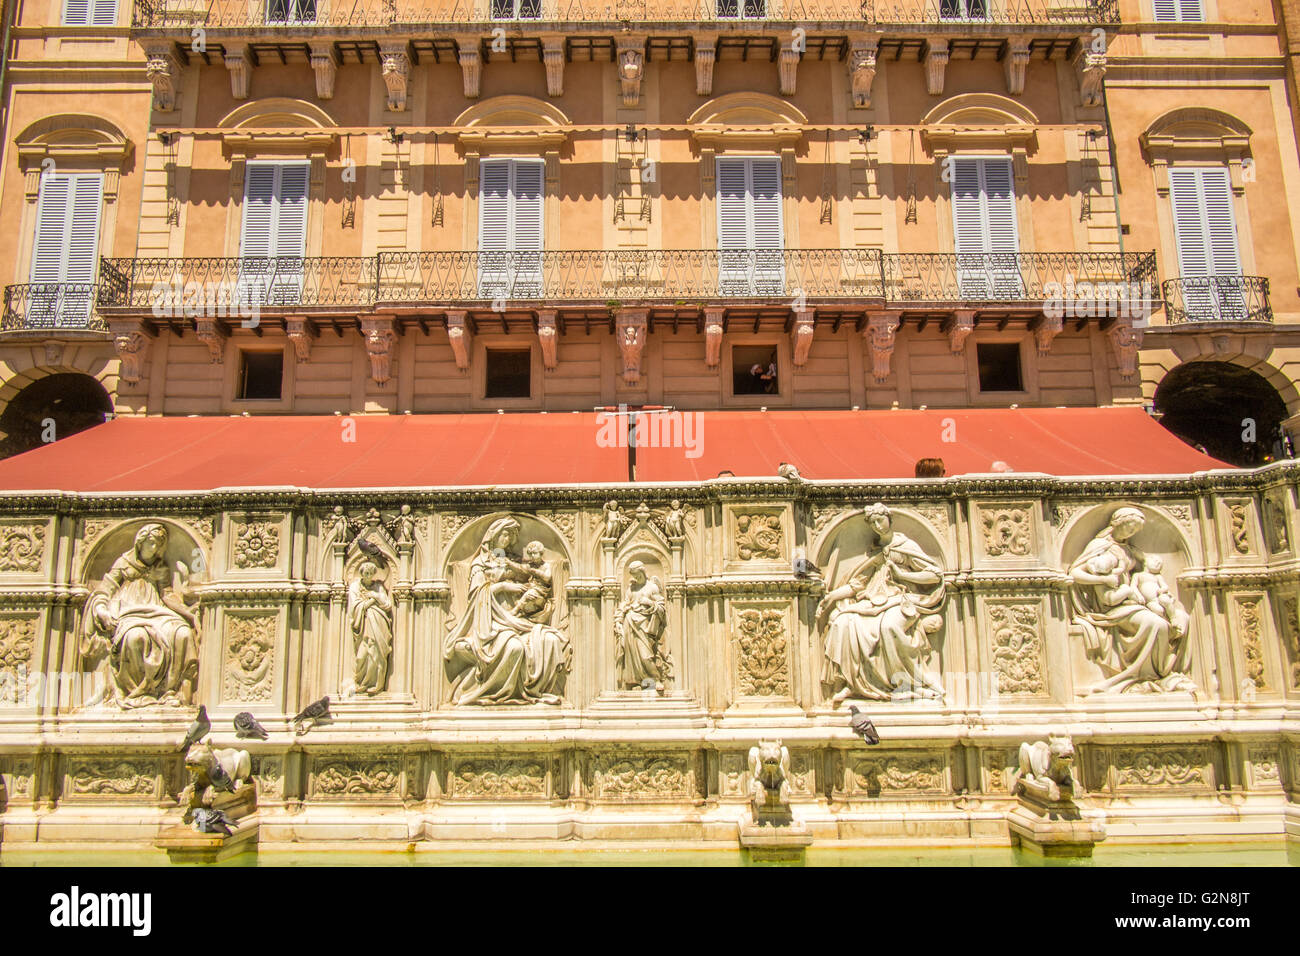 Building facade and water feature in 'Il Campo', a medieval Piazza in Siena, Tuscany, Italy. Stock Photo